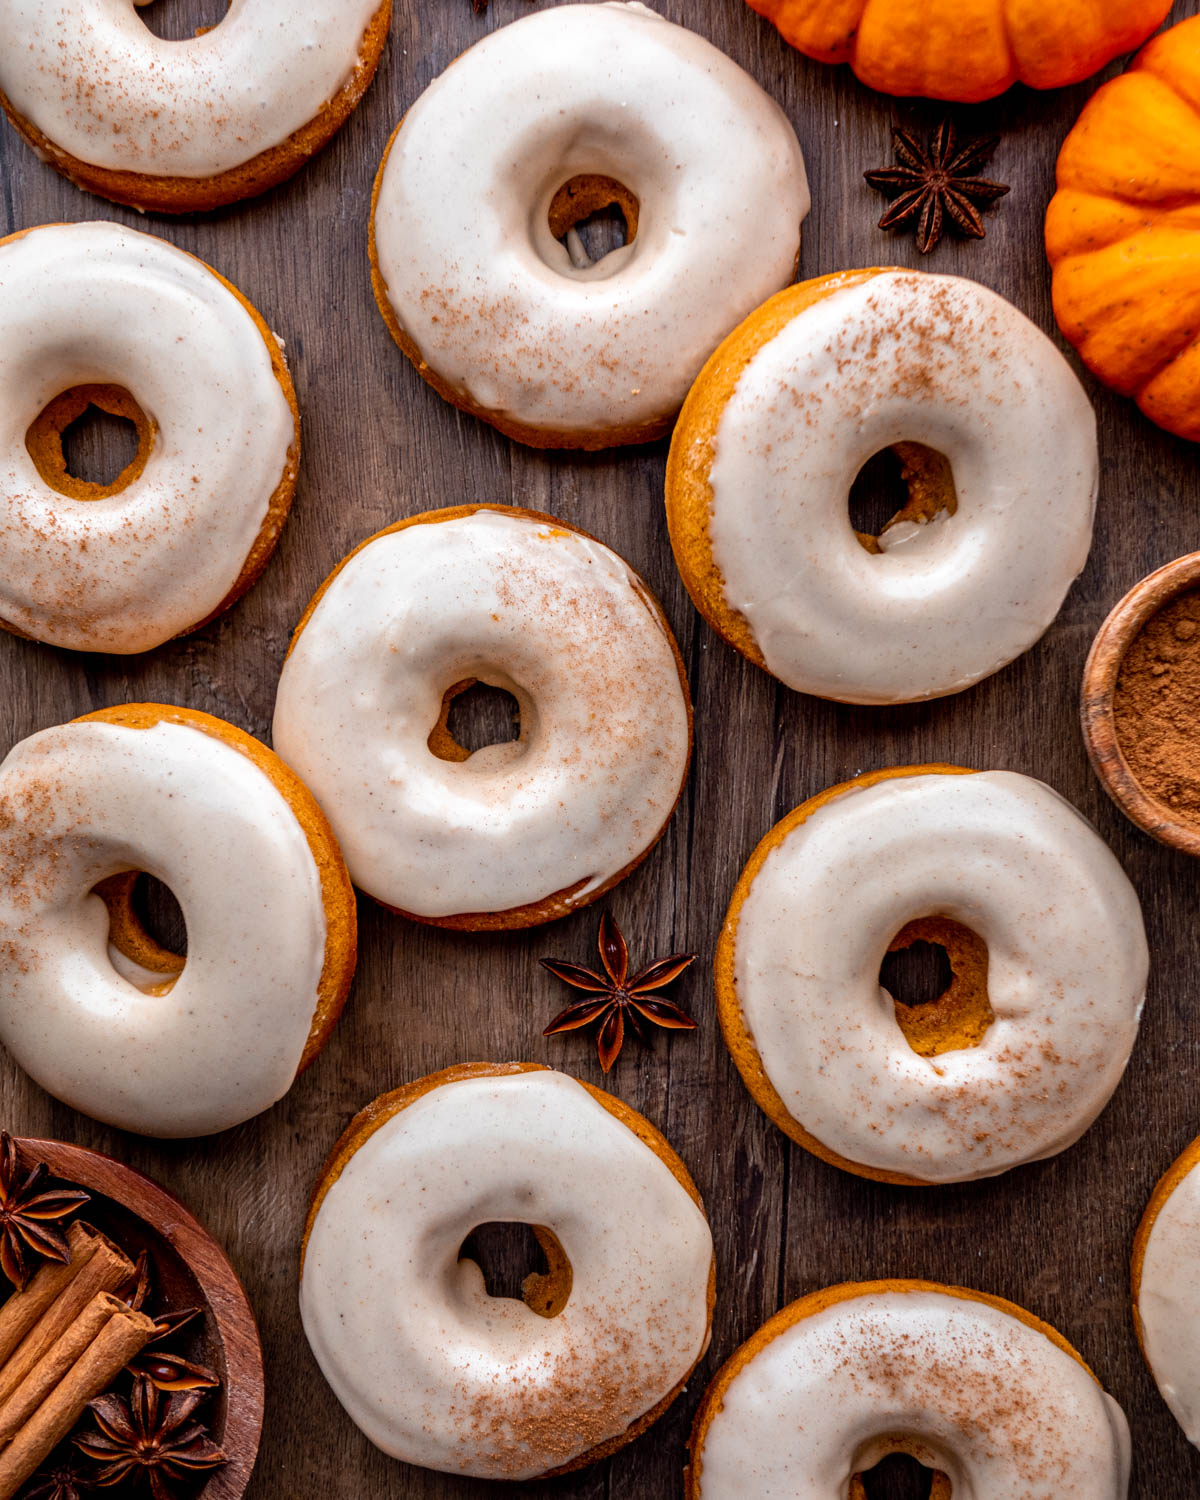 pumpkin donuts on a wood board with pumpkins, cinnamon sticks and star anise around